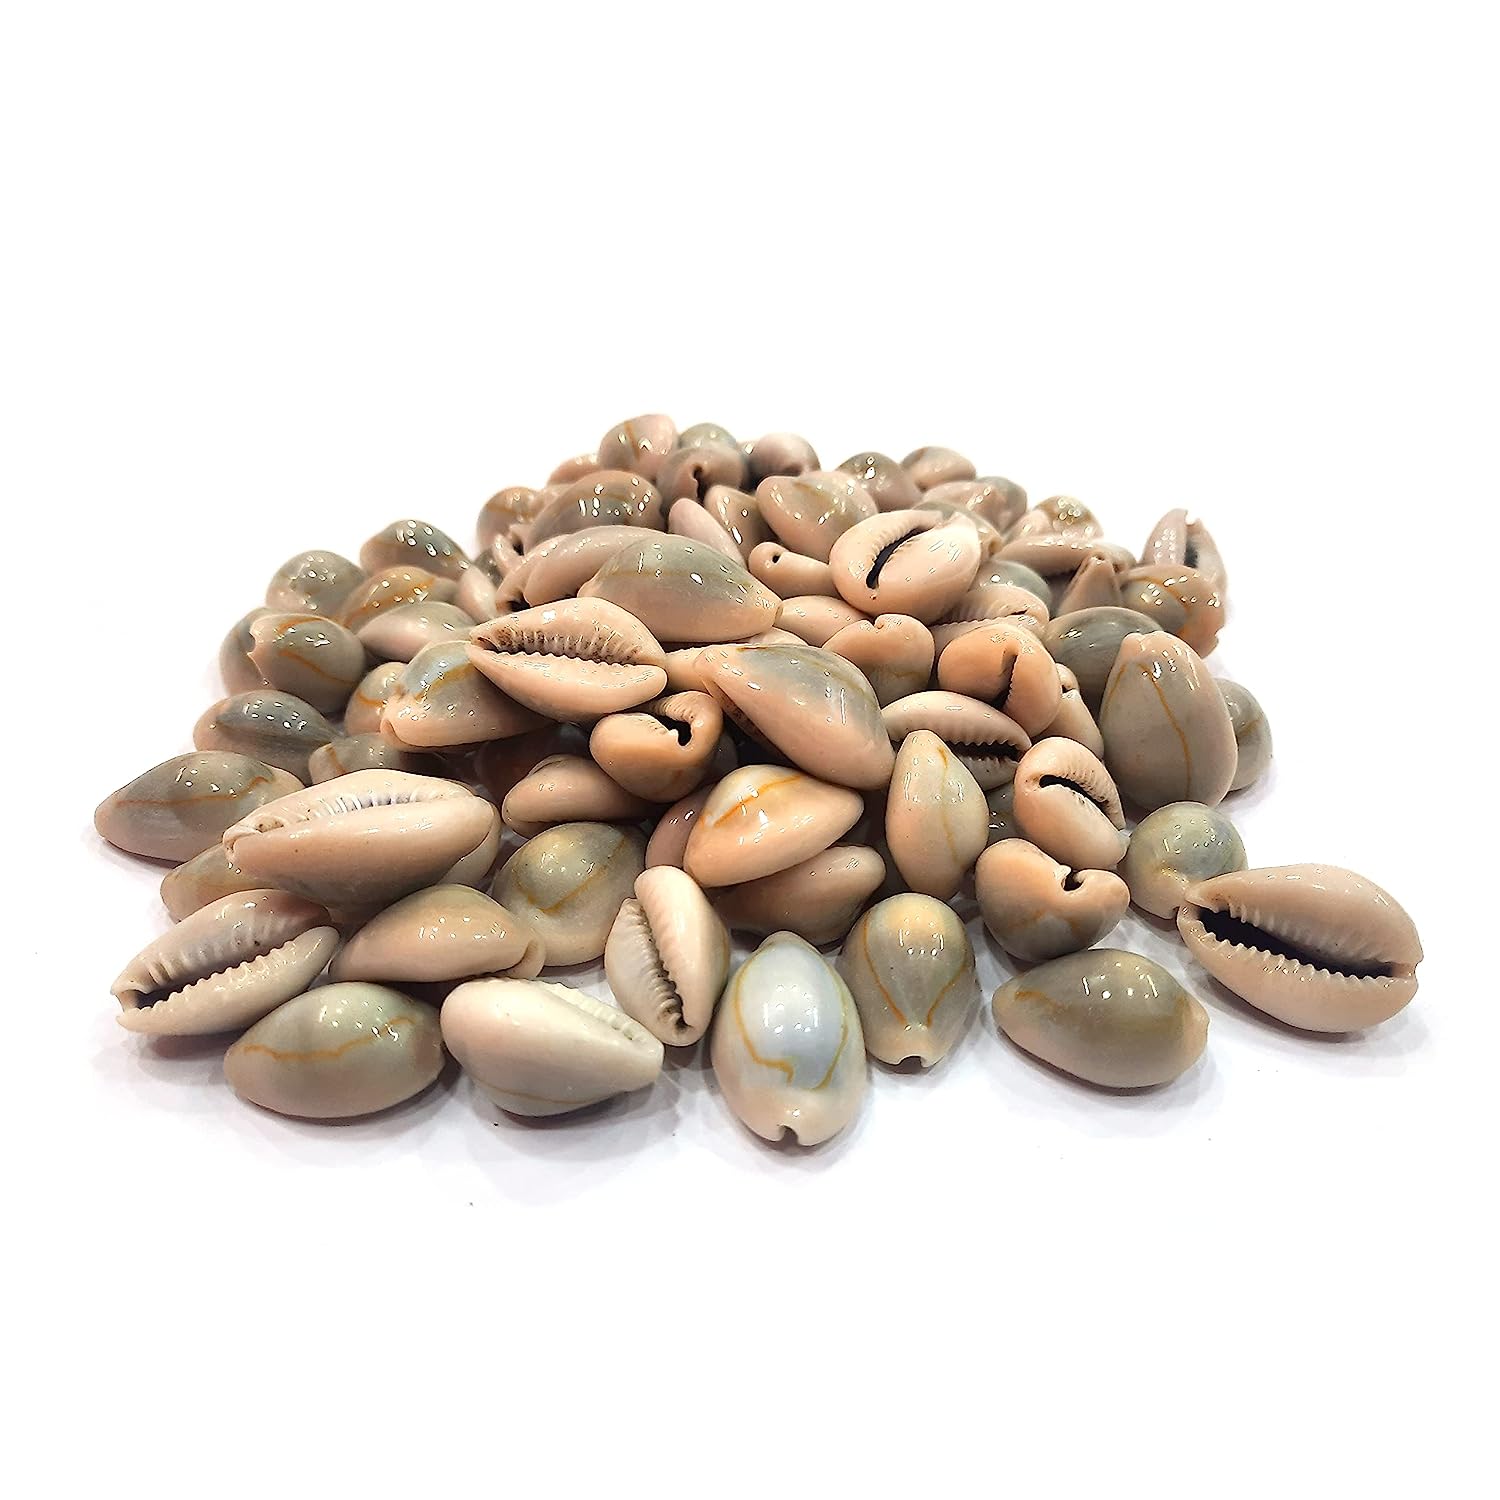 Cats Eye Cowrie / Kaudi Shells Size – 3 Cms Pack of 50